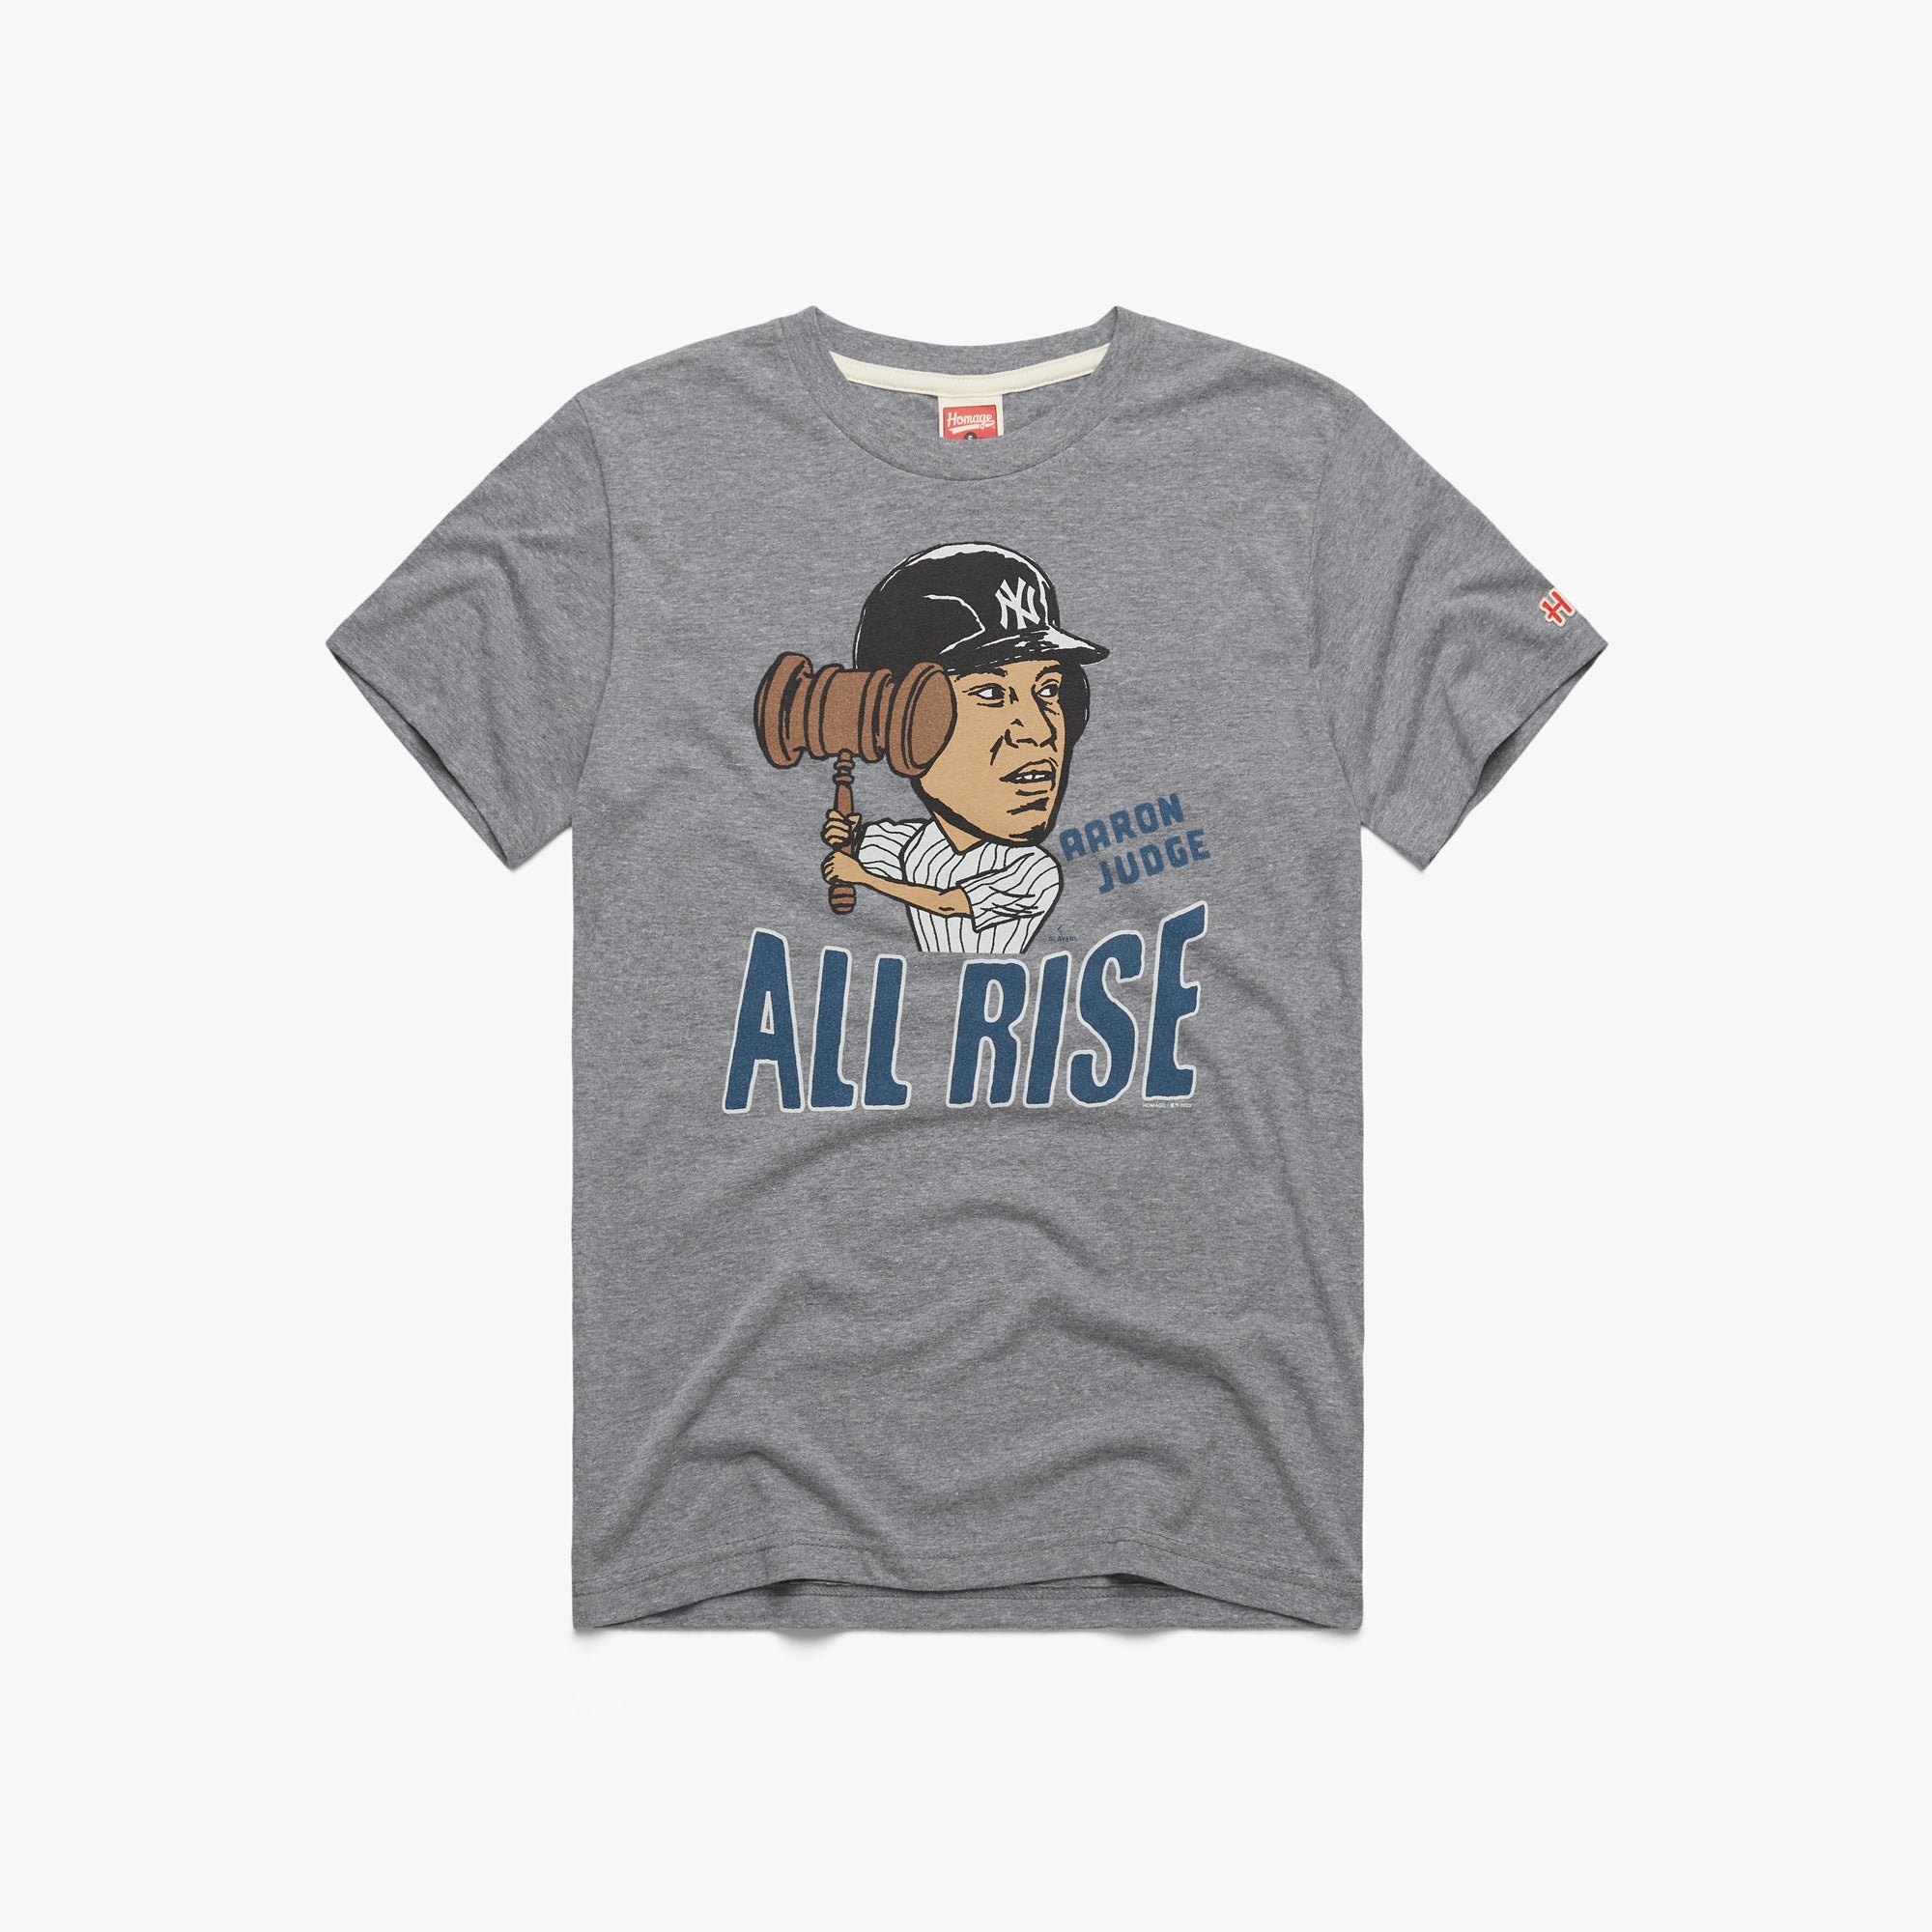 Aaron Judge Save It For The Judge Shirt, Custom prints store